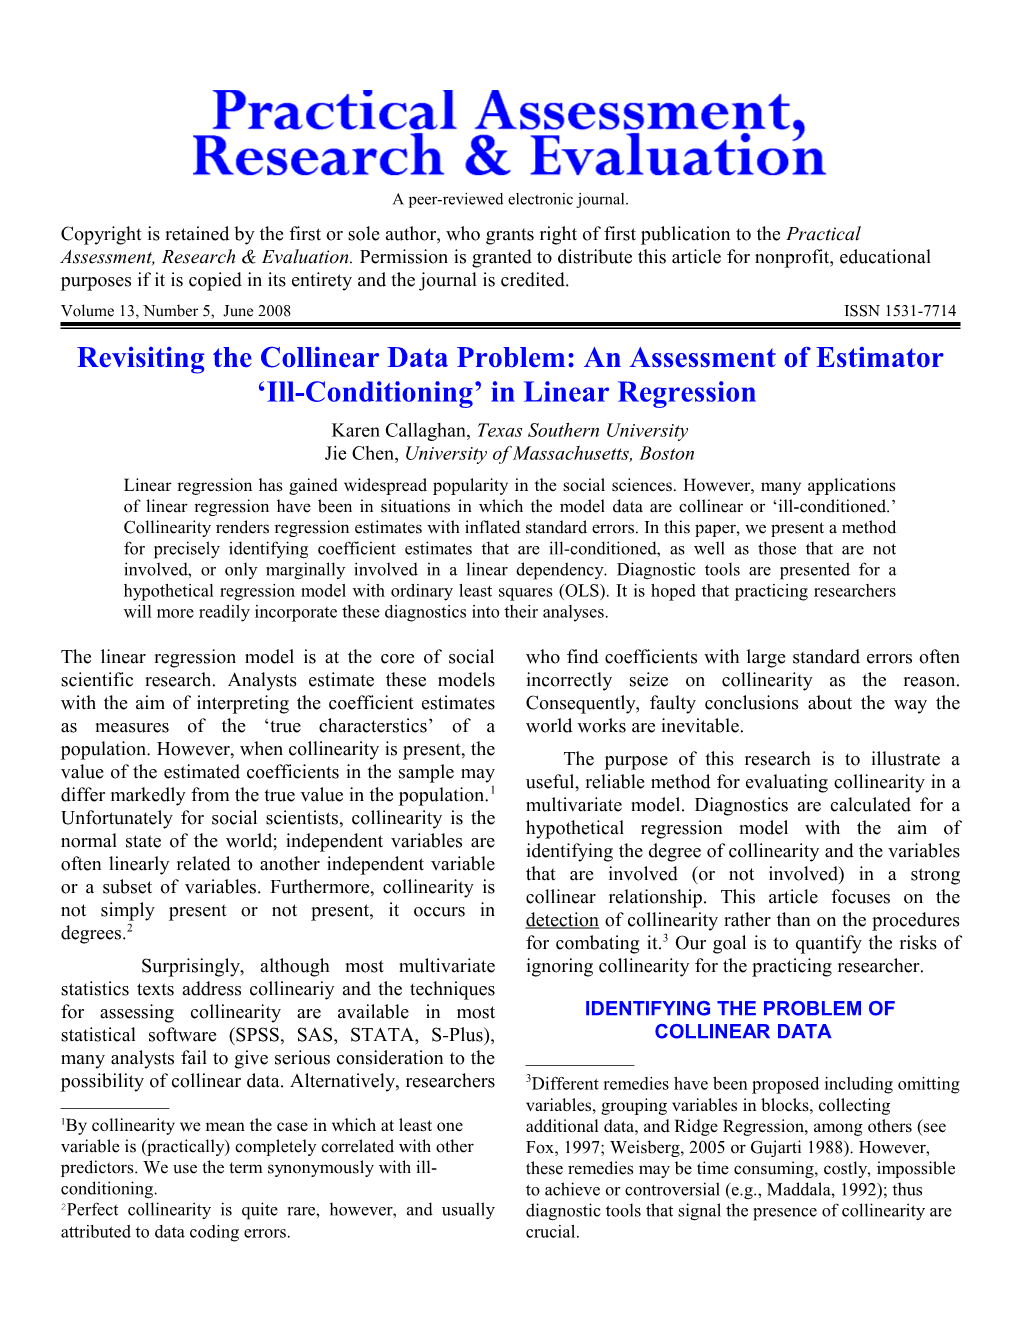 Revisiting the Collinear Data Problem: an Assessment of Estimator Ill-Conditioning in Linear